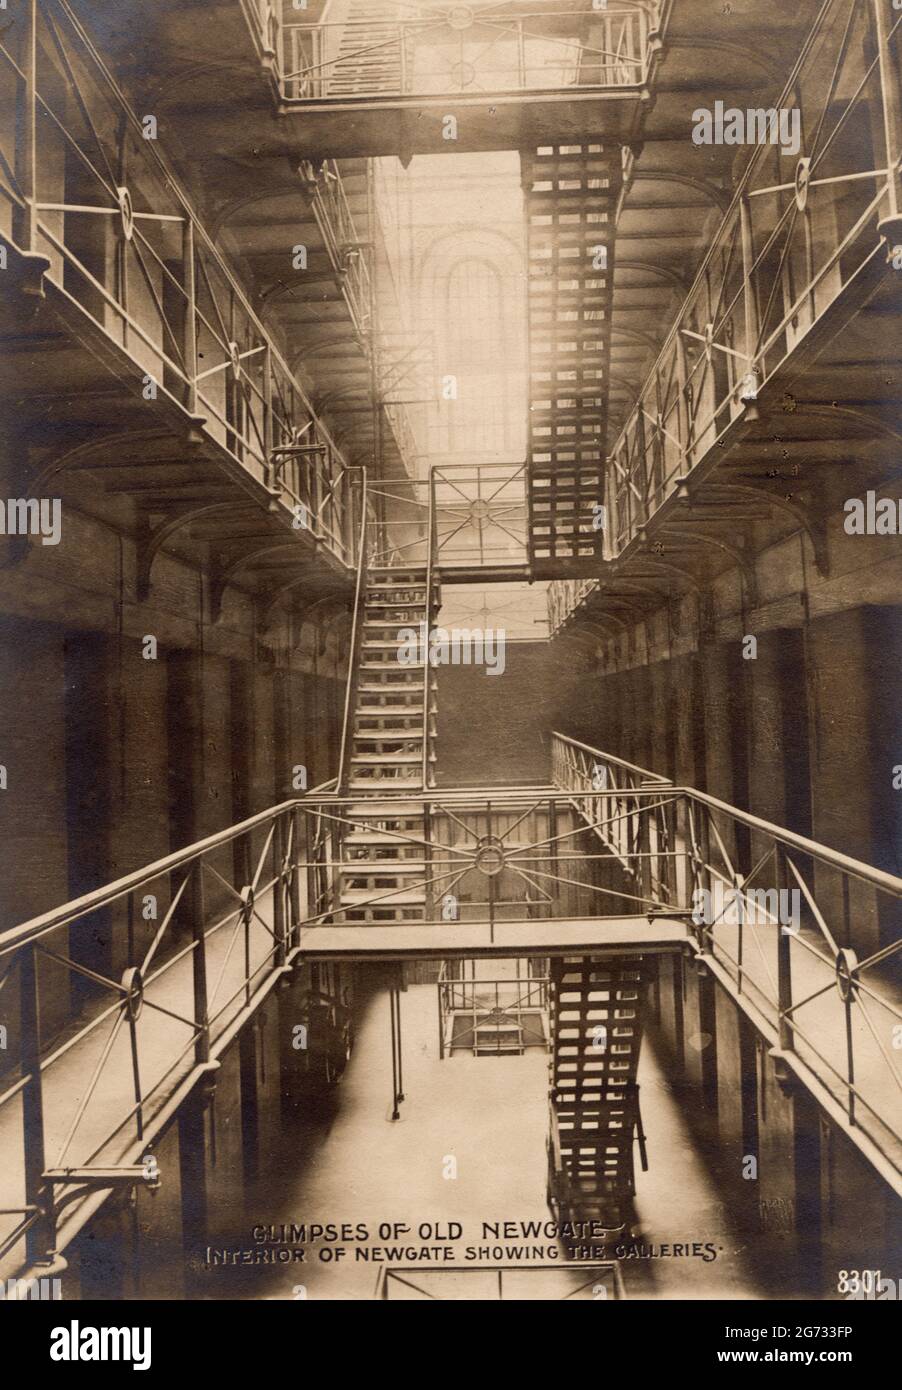 Glimpses of Old Newgate - Interior of Newgate showing the Galleries, c1900. Newgate Prison, dating back to the 12th century, was originally located at the site of Newgate, a gate in the Roman wall around the city of London. Public hangings, of both men and women, took place outside the prison from 1783 and continued until 1868, when executions were carried out on gallows inside Newgate. In total, 1,169 people were executed - publicly or otherwise - at the prison. Many types of criminals were imprisoned at Newgate, and their offences varied from petty crime and theft, breaking and entering, hig Stock Photo